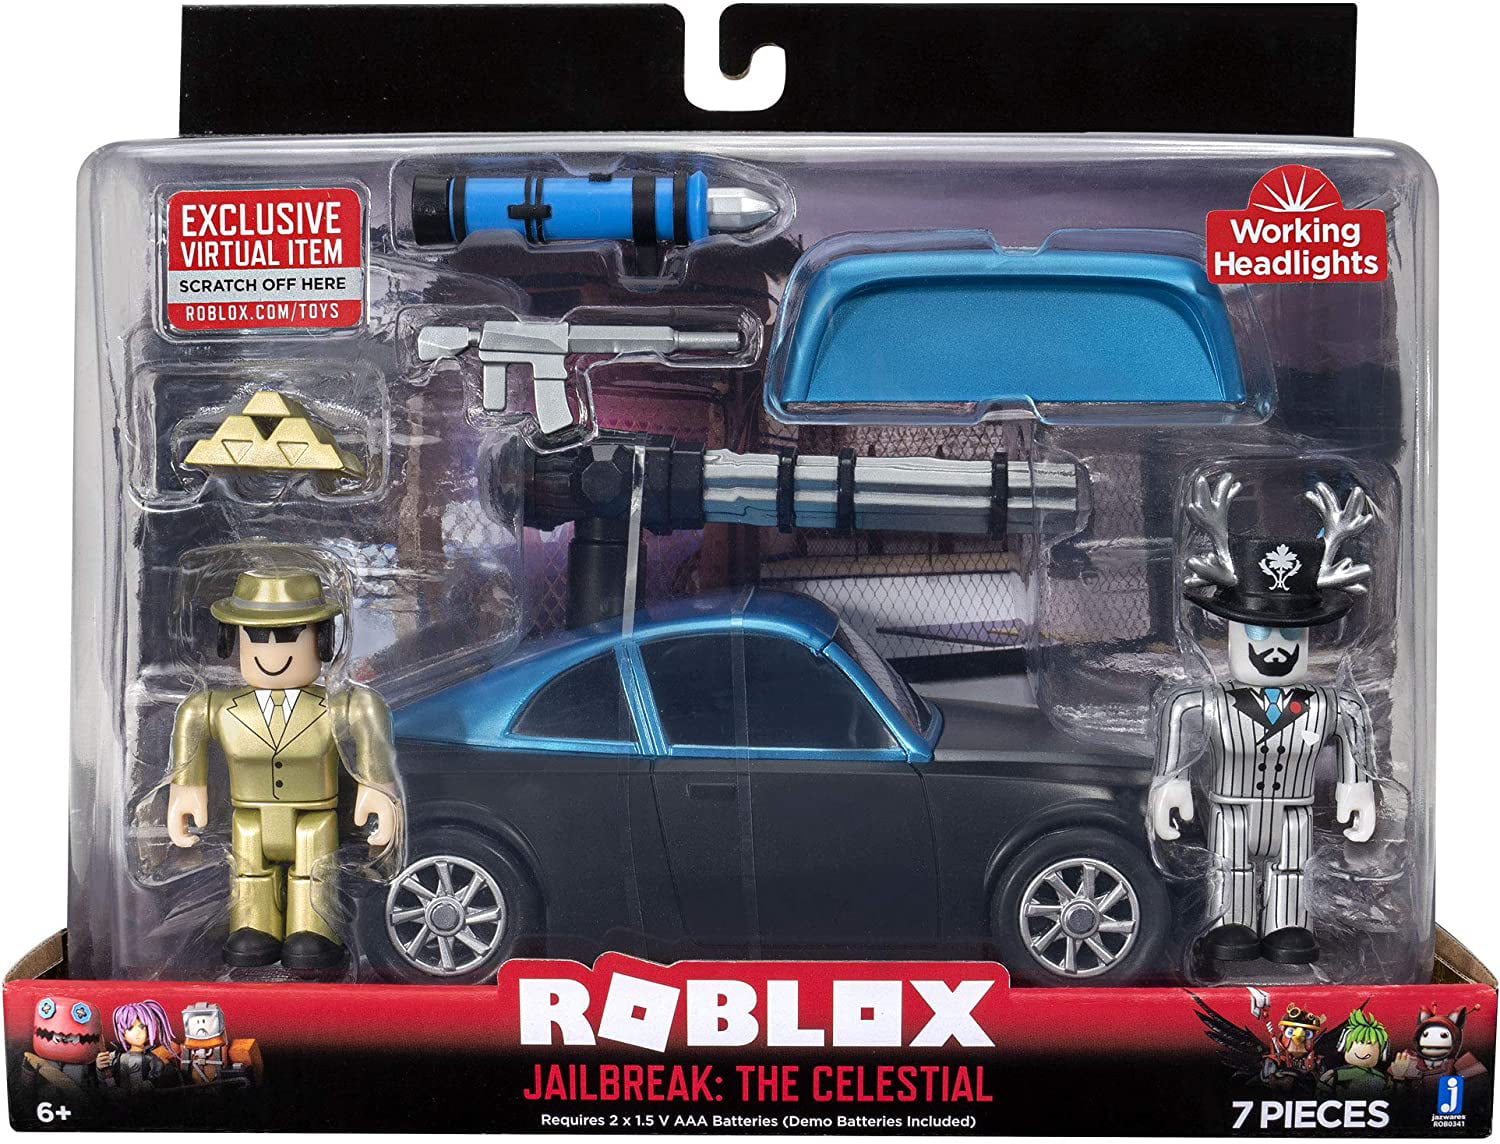 Roblox Action Collection Jailbreak The Celestial Deluxe Vehicle Includes Exclusive Virtual Item Walmart Com Walmart Com - roblox jailbreak radio station